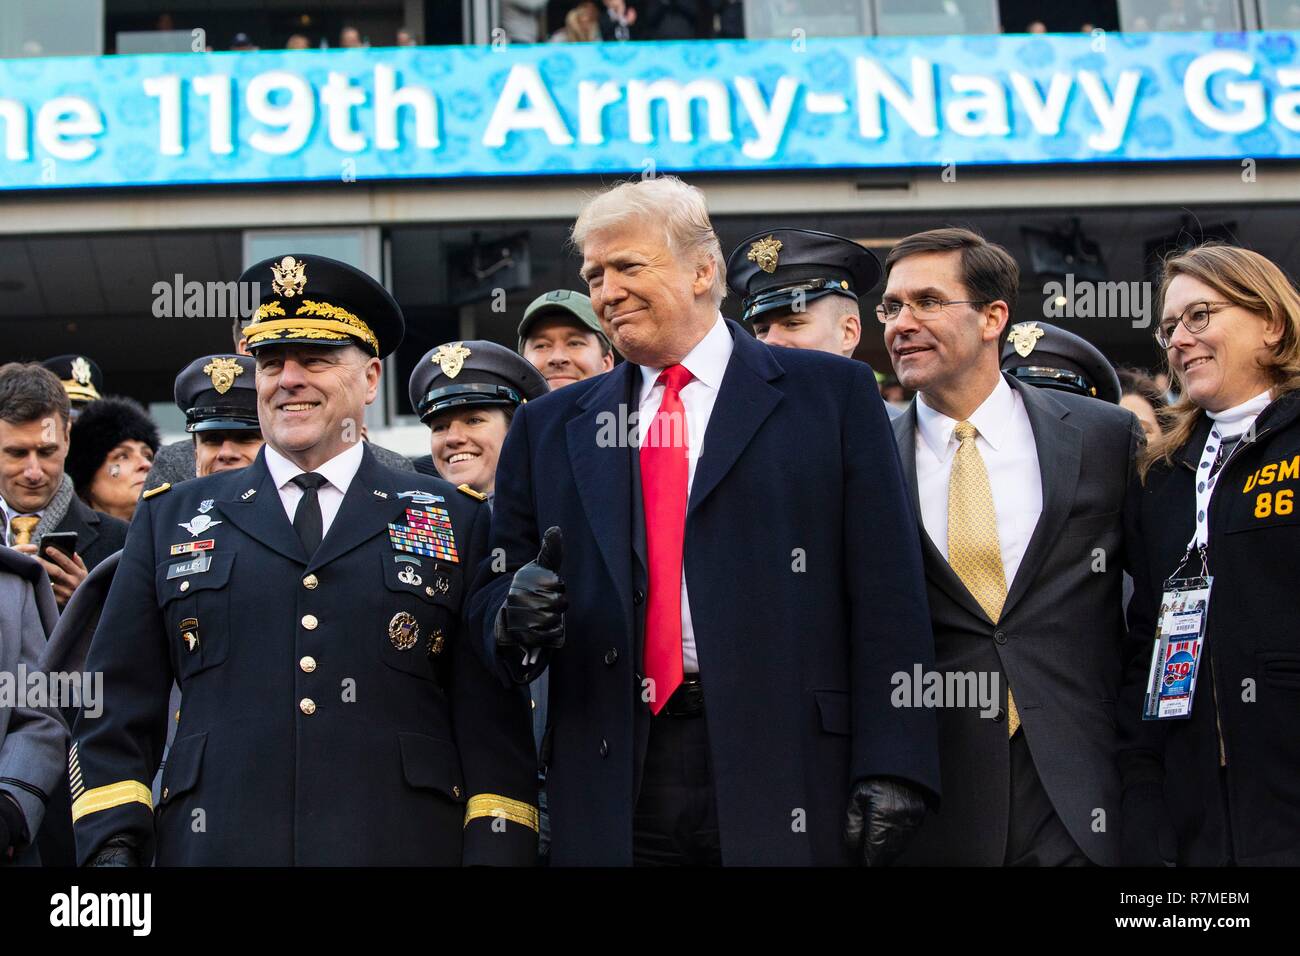 U.S President Donald Trump, center, stands with Army Secretary Dr. Mark Esper, right, and Army Chief of Staff Mark Milley, left, before the start of the 119th Army Navy game at Lincoln Financial Field December 8, 2018  in Philadelphia, Pennsylvania. Stock Photo